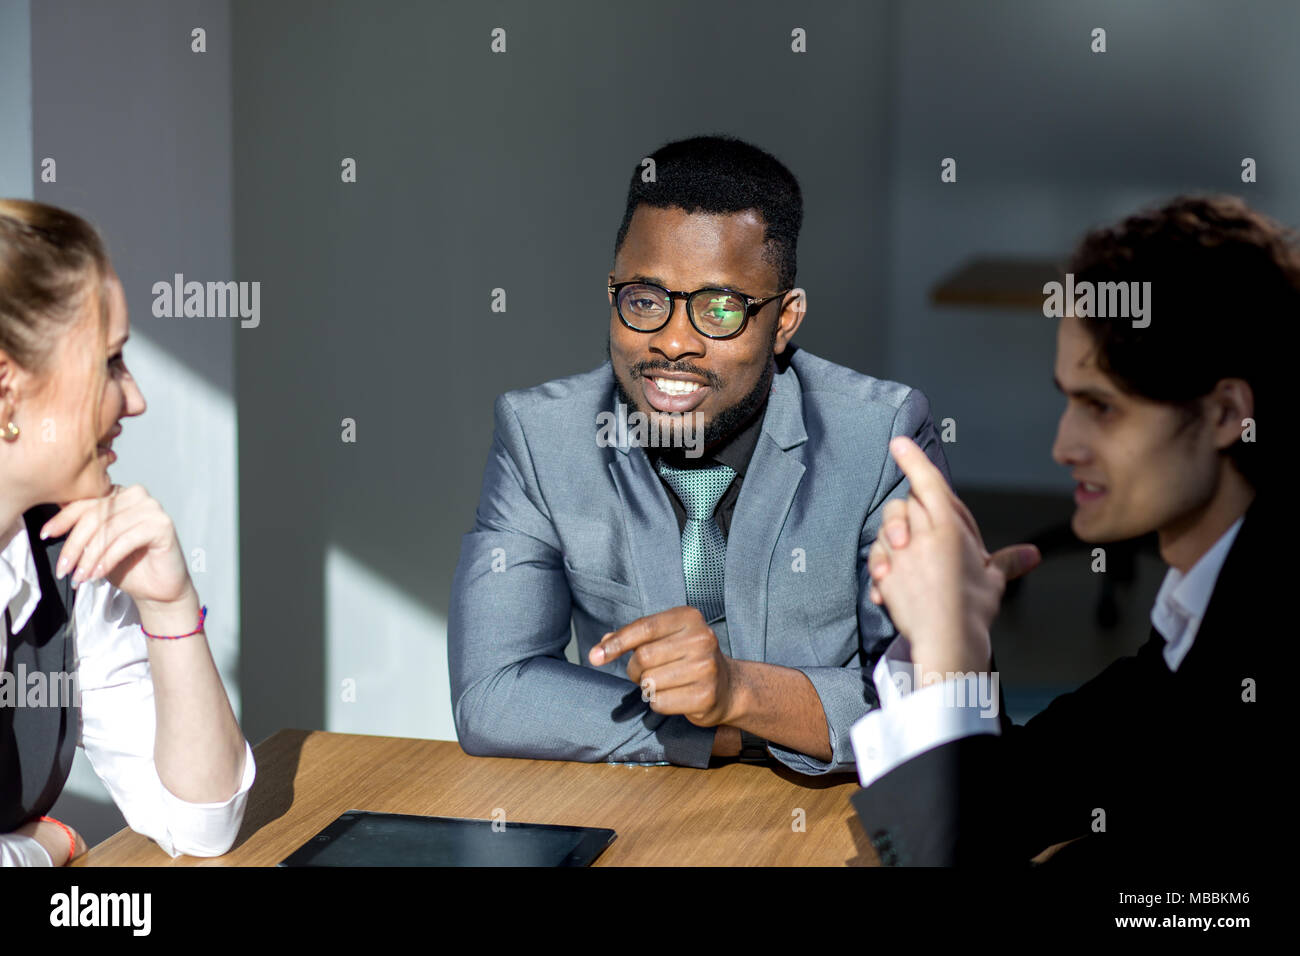 Business people listening to marketing professional african speaker presentation Stock Photo